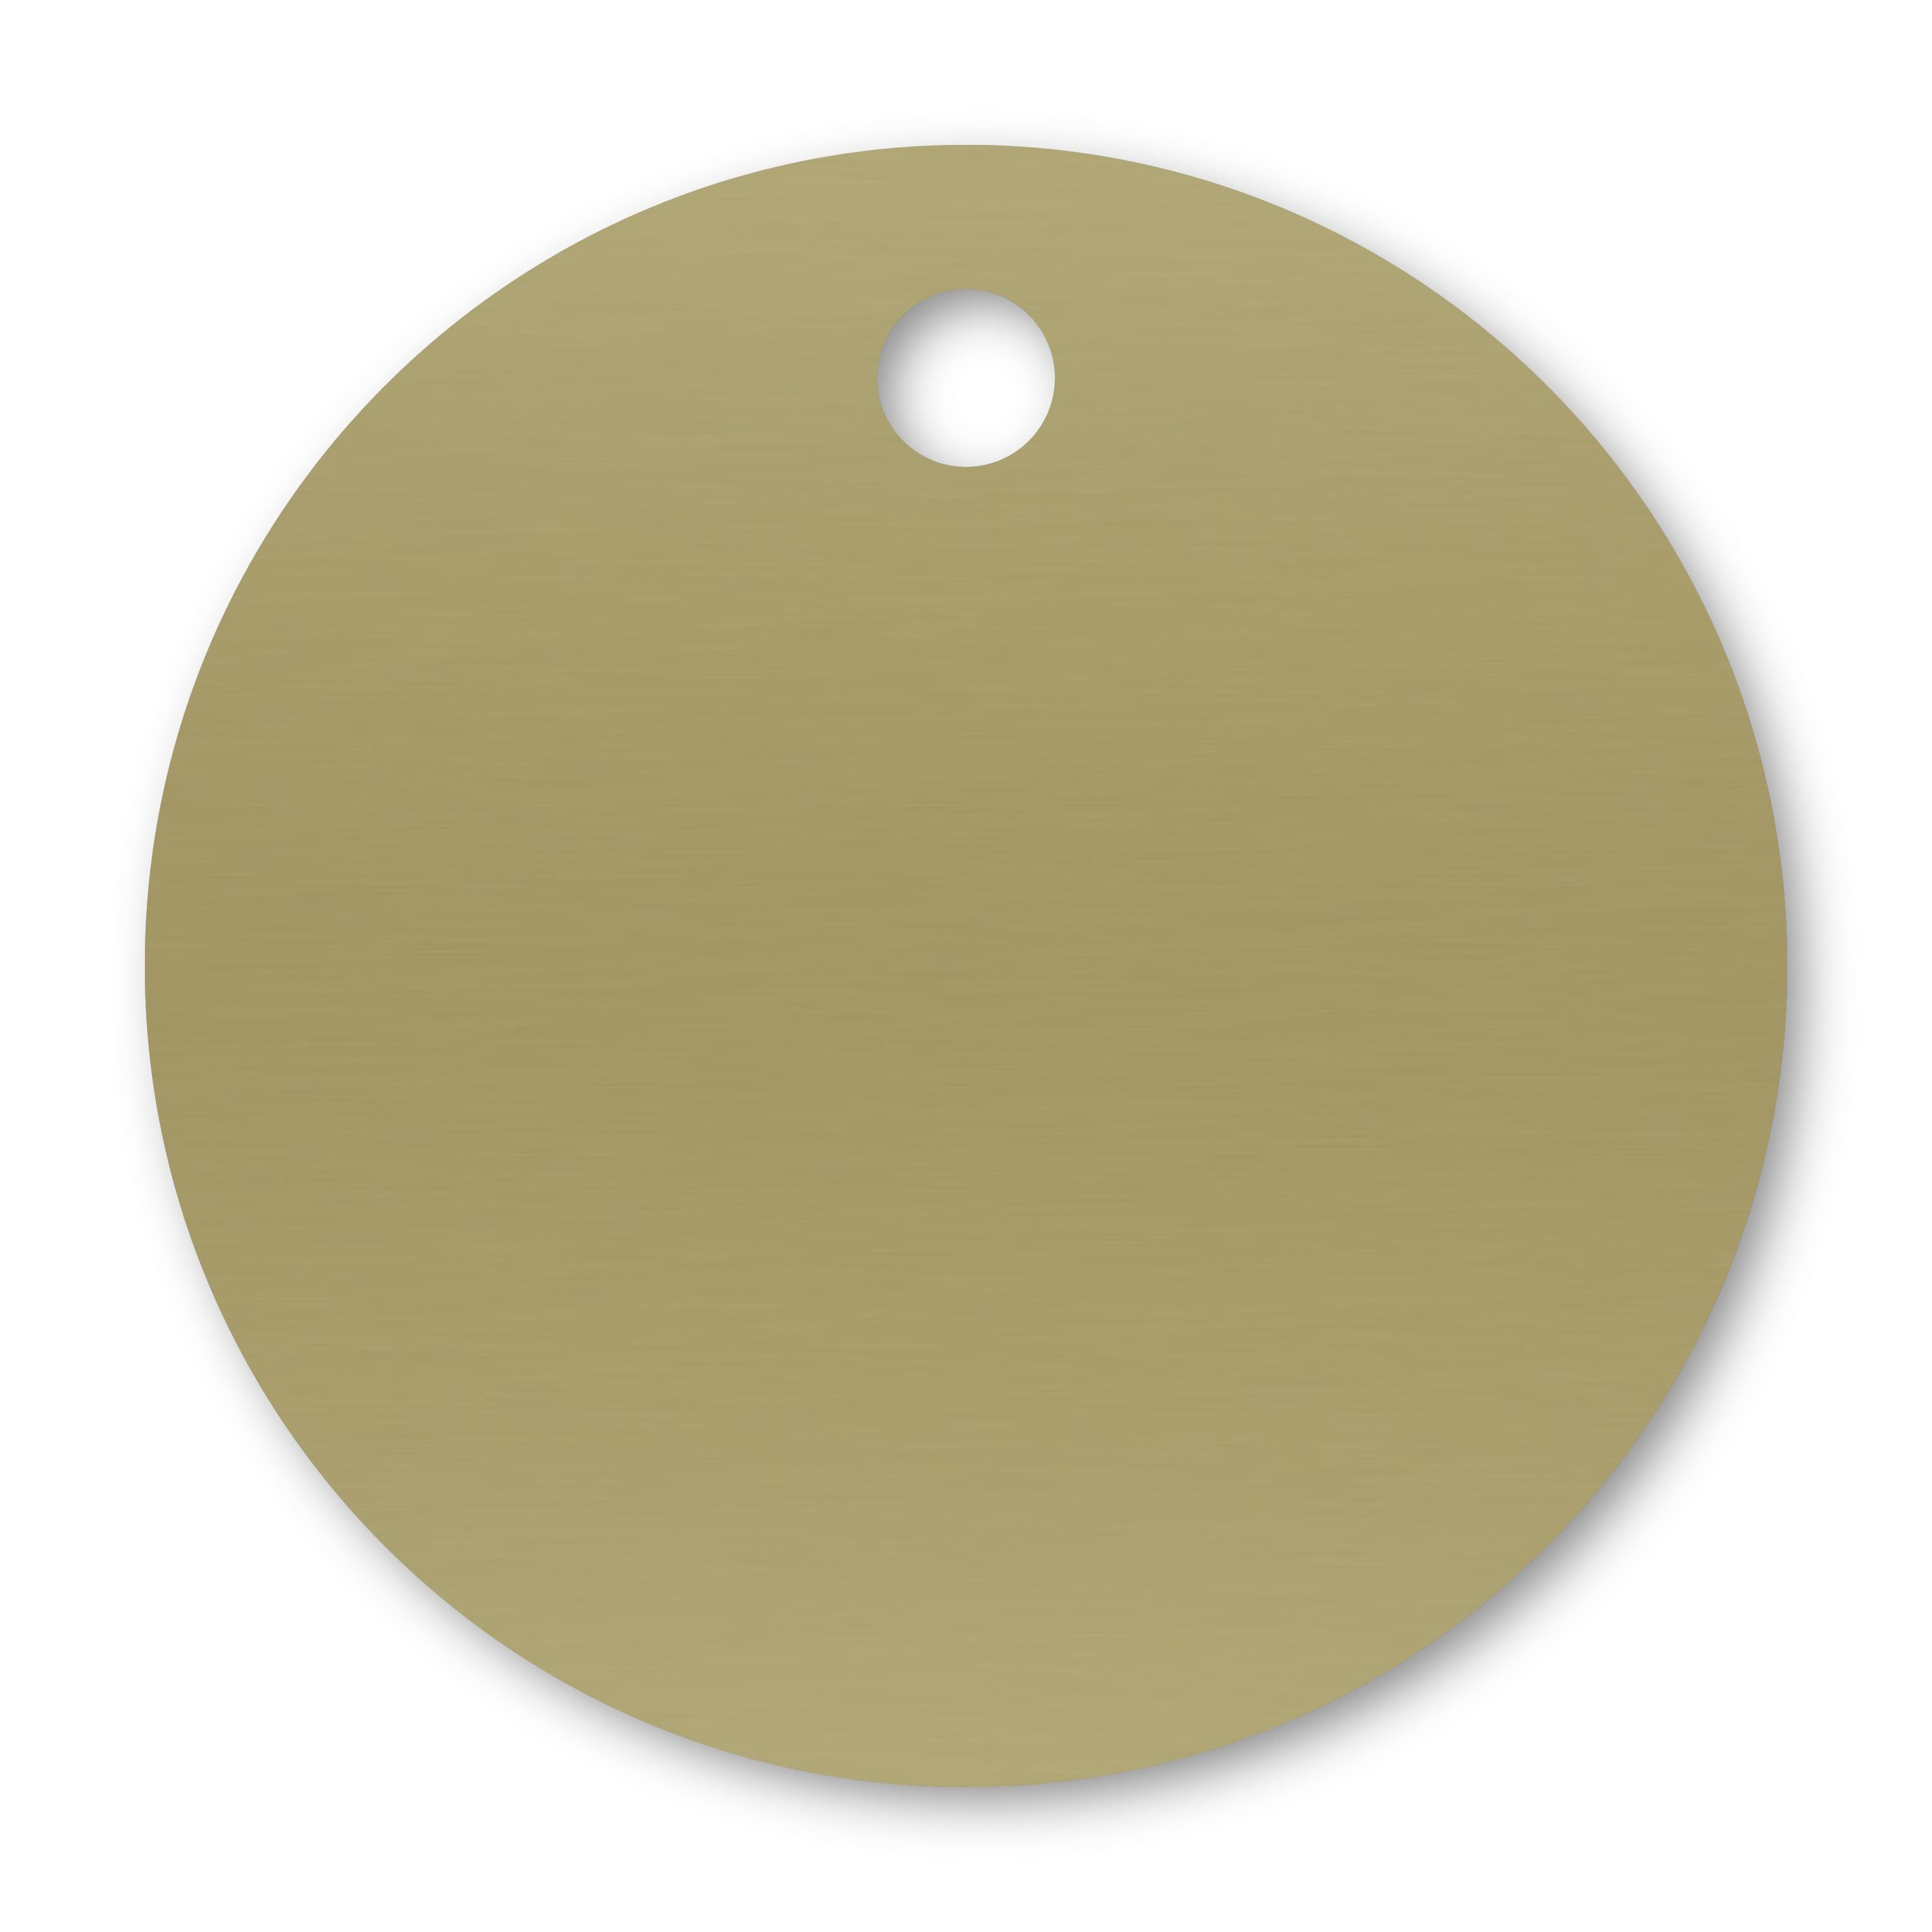 Anodized Aluminum Round Tags, 7/8" with 3/32" Hole, Laser Engraved Metal Tags Craftworks NW Gold 